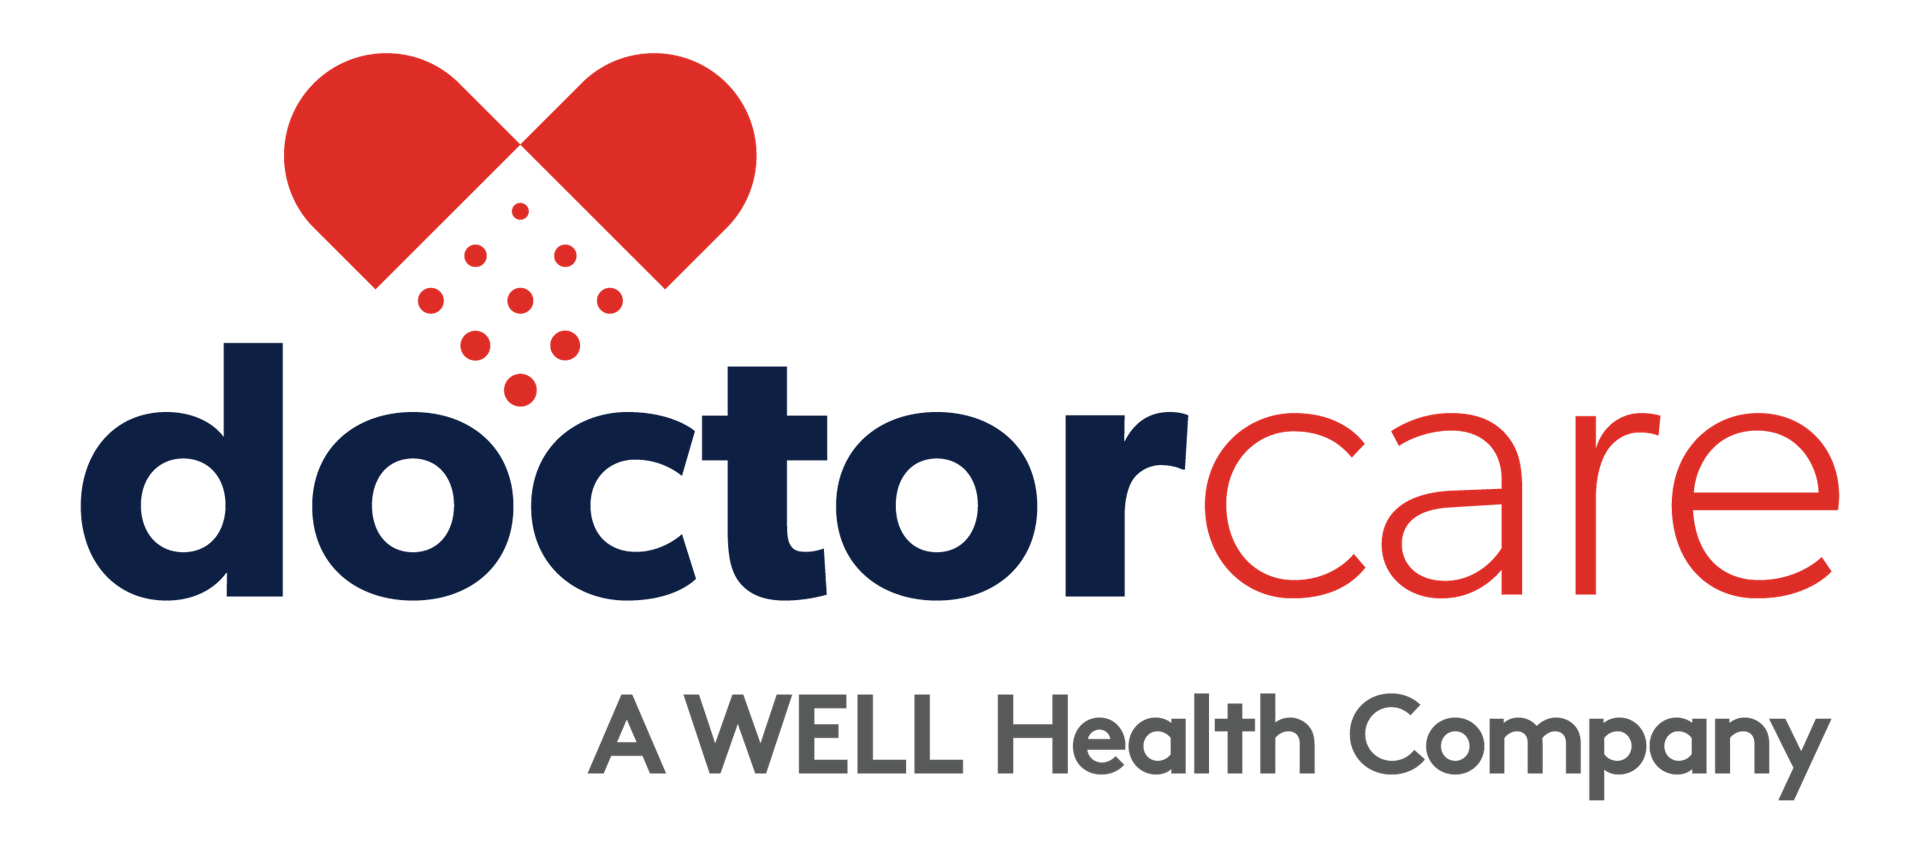 doctorcare-logo-and-link